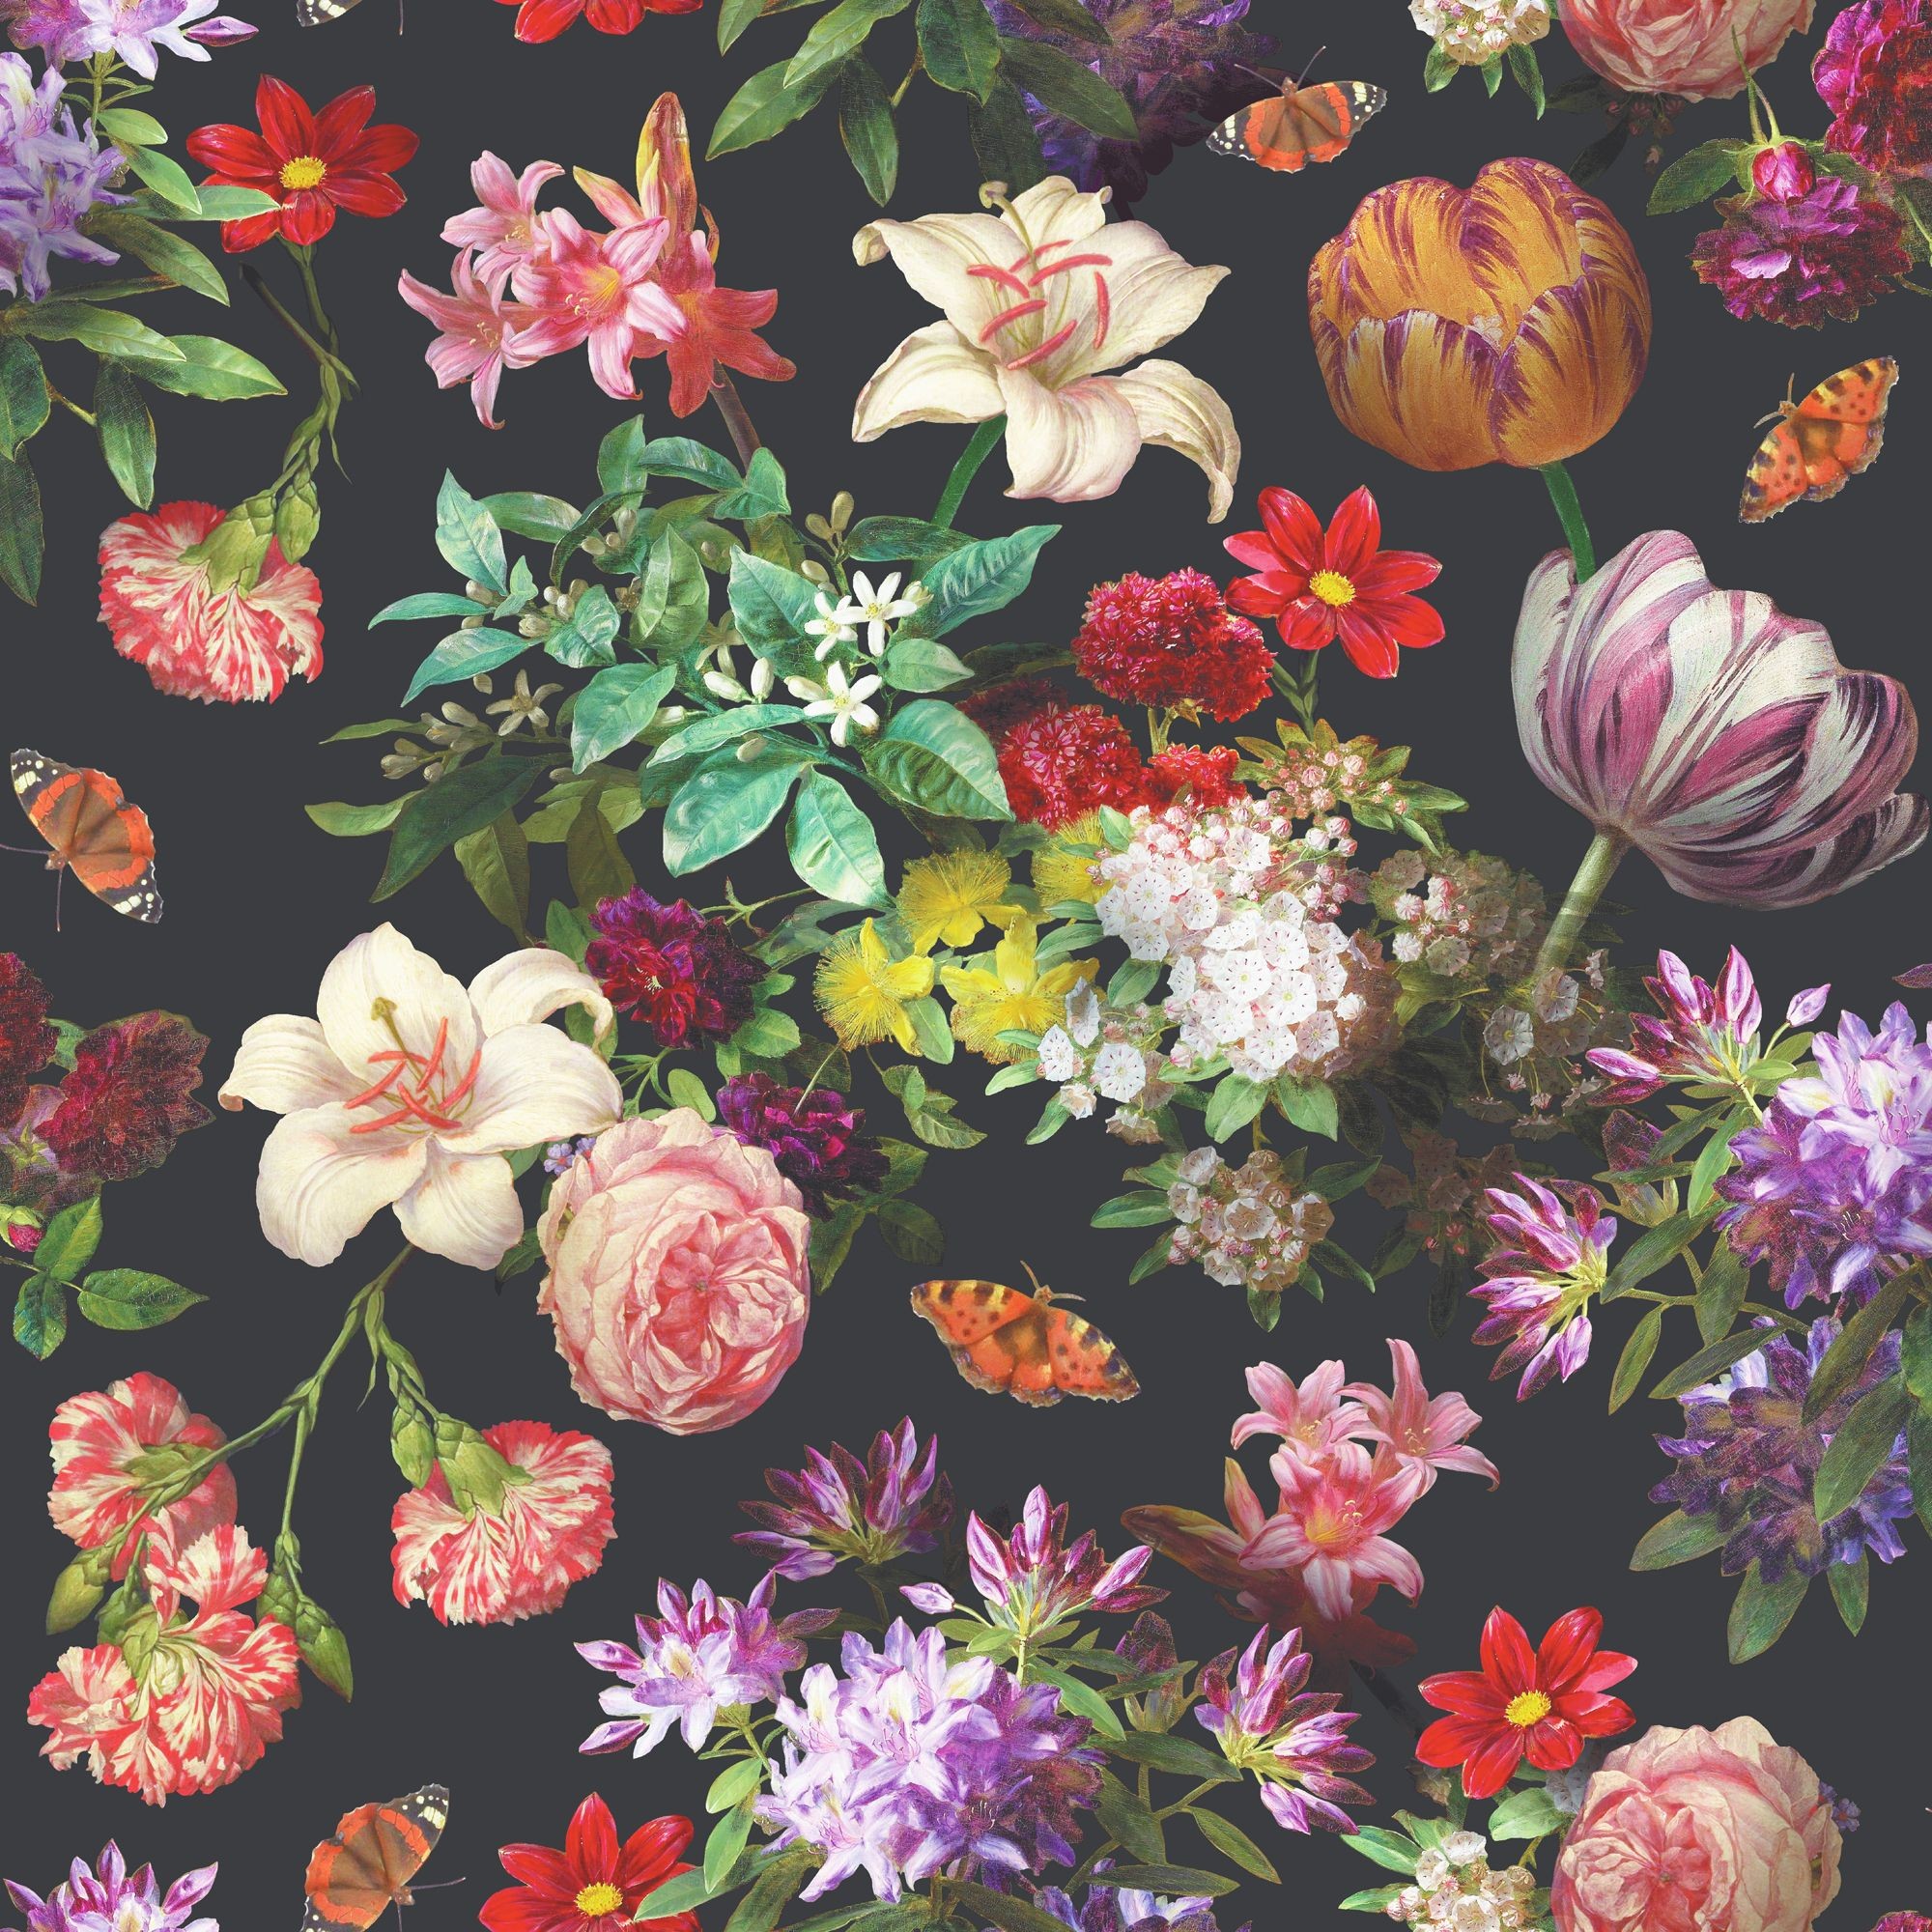 Floral wallpaper ·① Download free HD backgrounds for ...